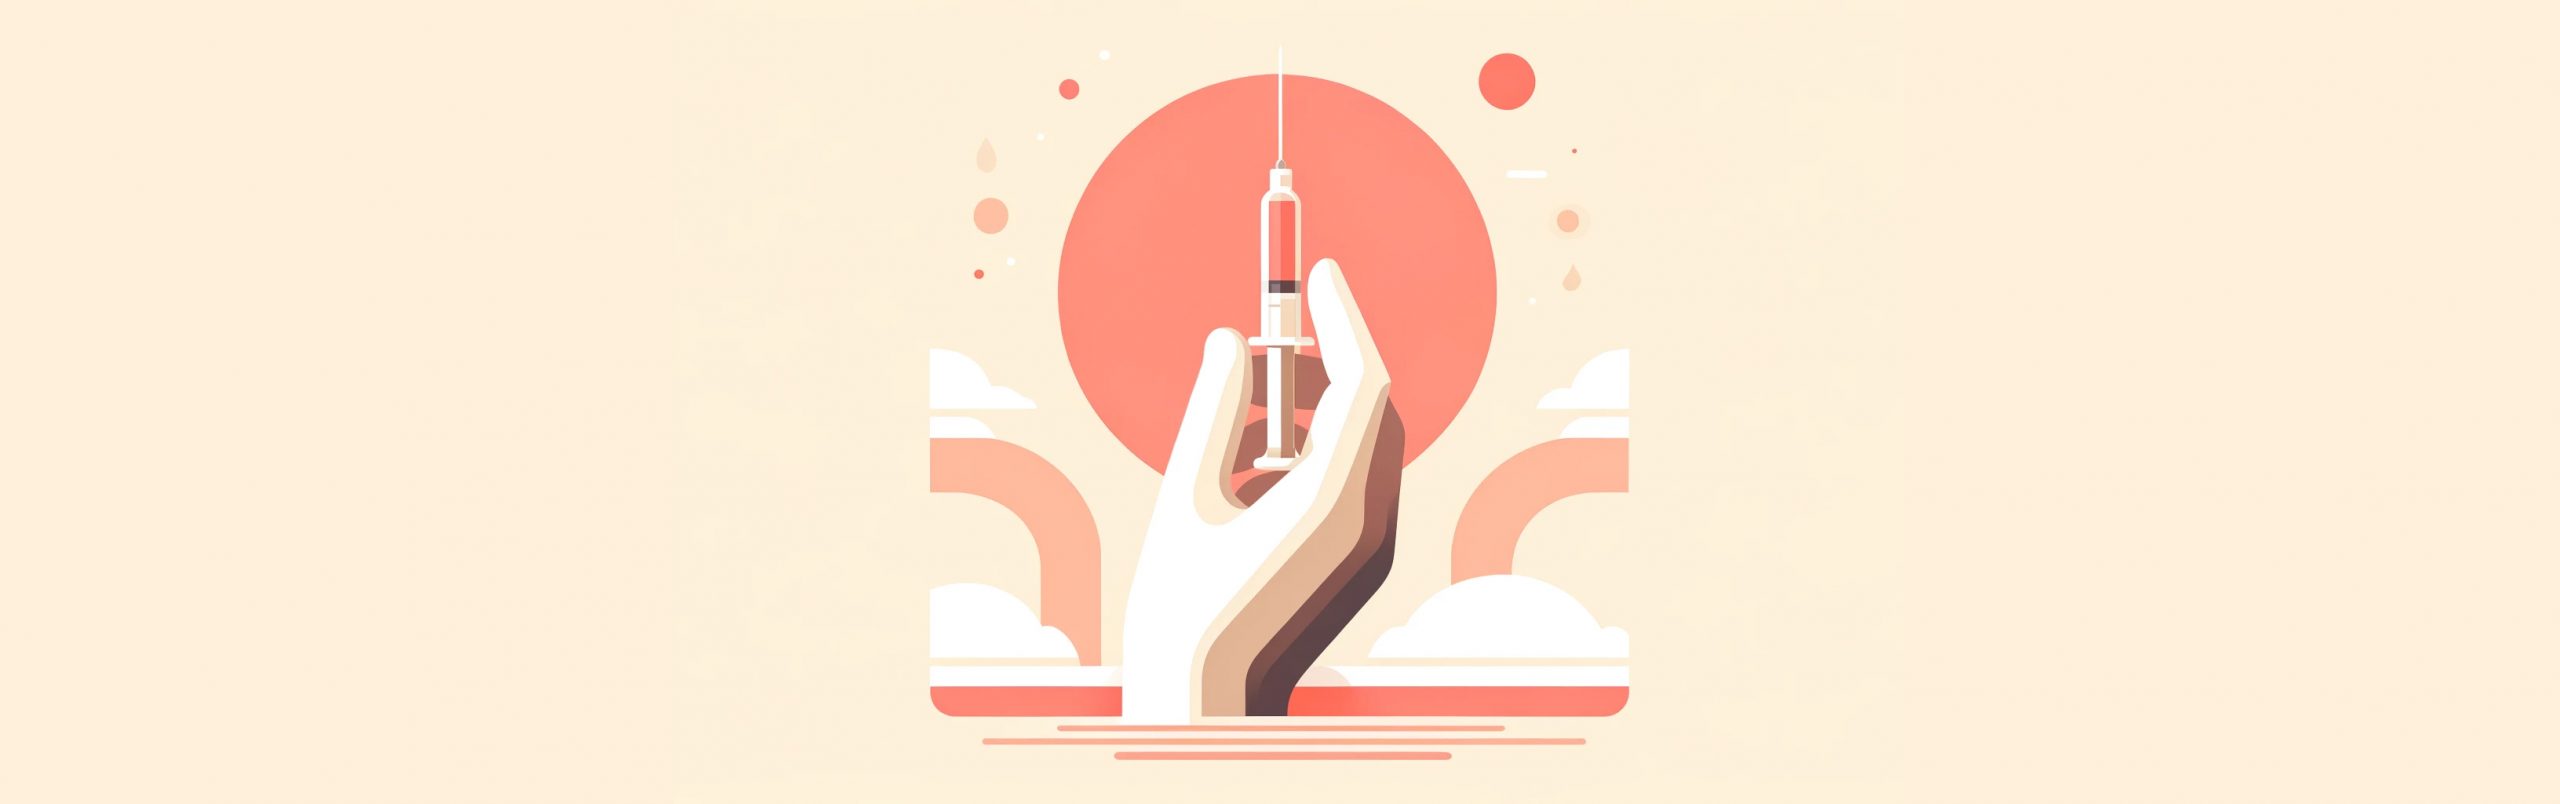 Modern minimalist illustration of a hand holding a syringe, in soft light orange and baby pink tones, symbolising blood tests during pregnancy at London Pregnancy Clinic.